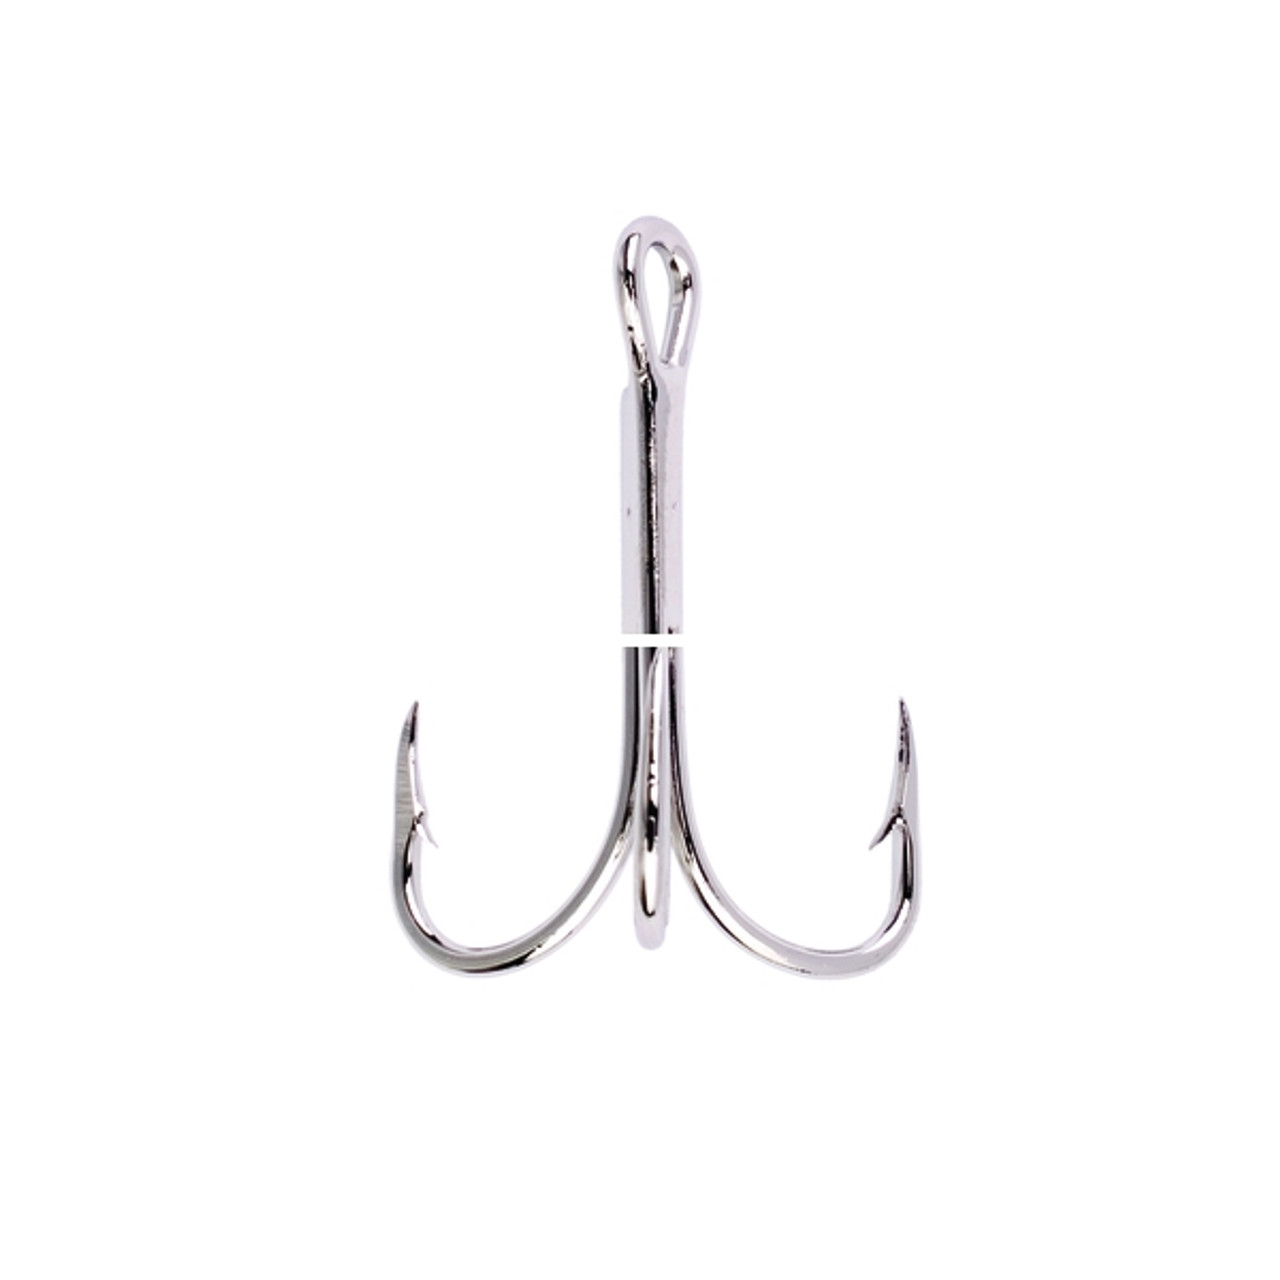 Eagle Claw L375GH-2/0 Lazer Sharp - Treble Hook, Size 2/0, Needle - L375GH- 2/0 - Big Country Sporting Goods